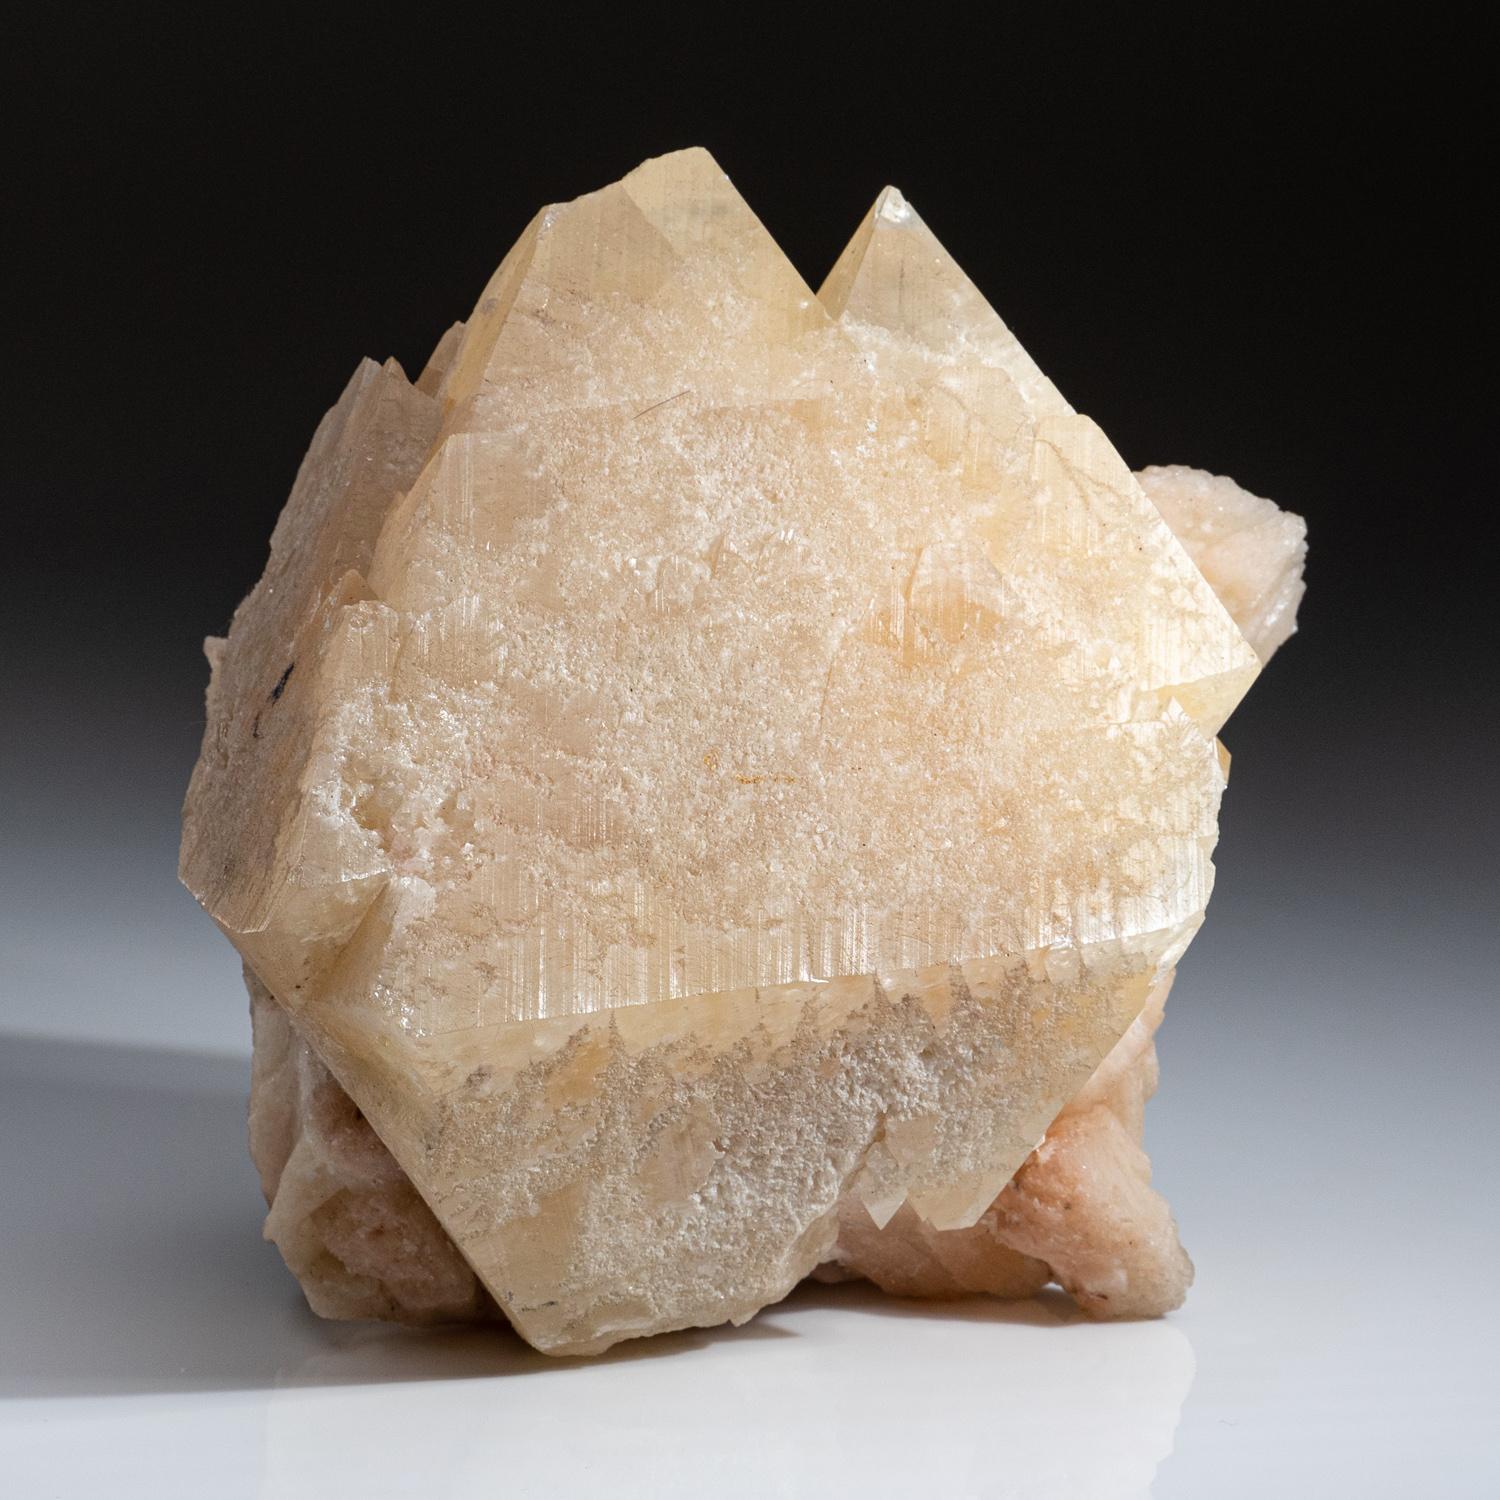 Powellite Crystal on Stilbite From Jalgaon, Maharashtra State, India.

Huge pyramidal crystal of translucent brown powellite with lustrous striated faces on a matrix of pink stilbite crystals.

Measures: Weight: 7.15 lbs, 5 x 3 x 6 inches.